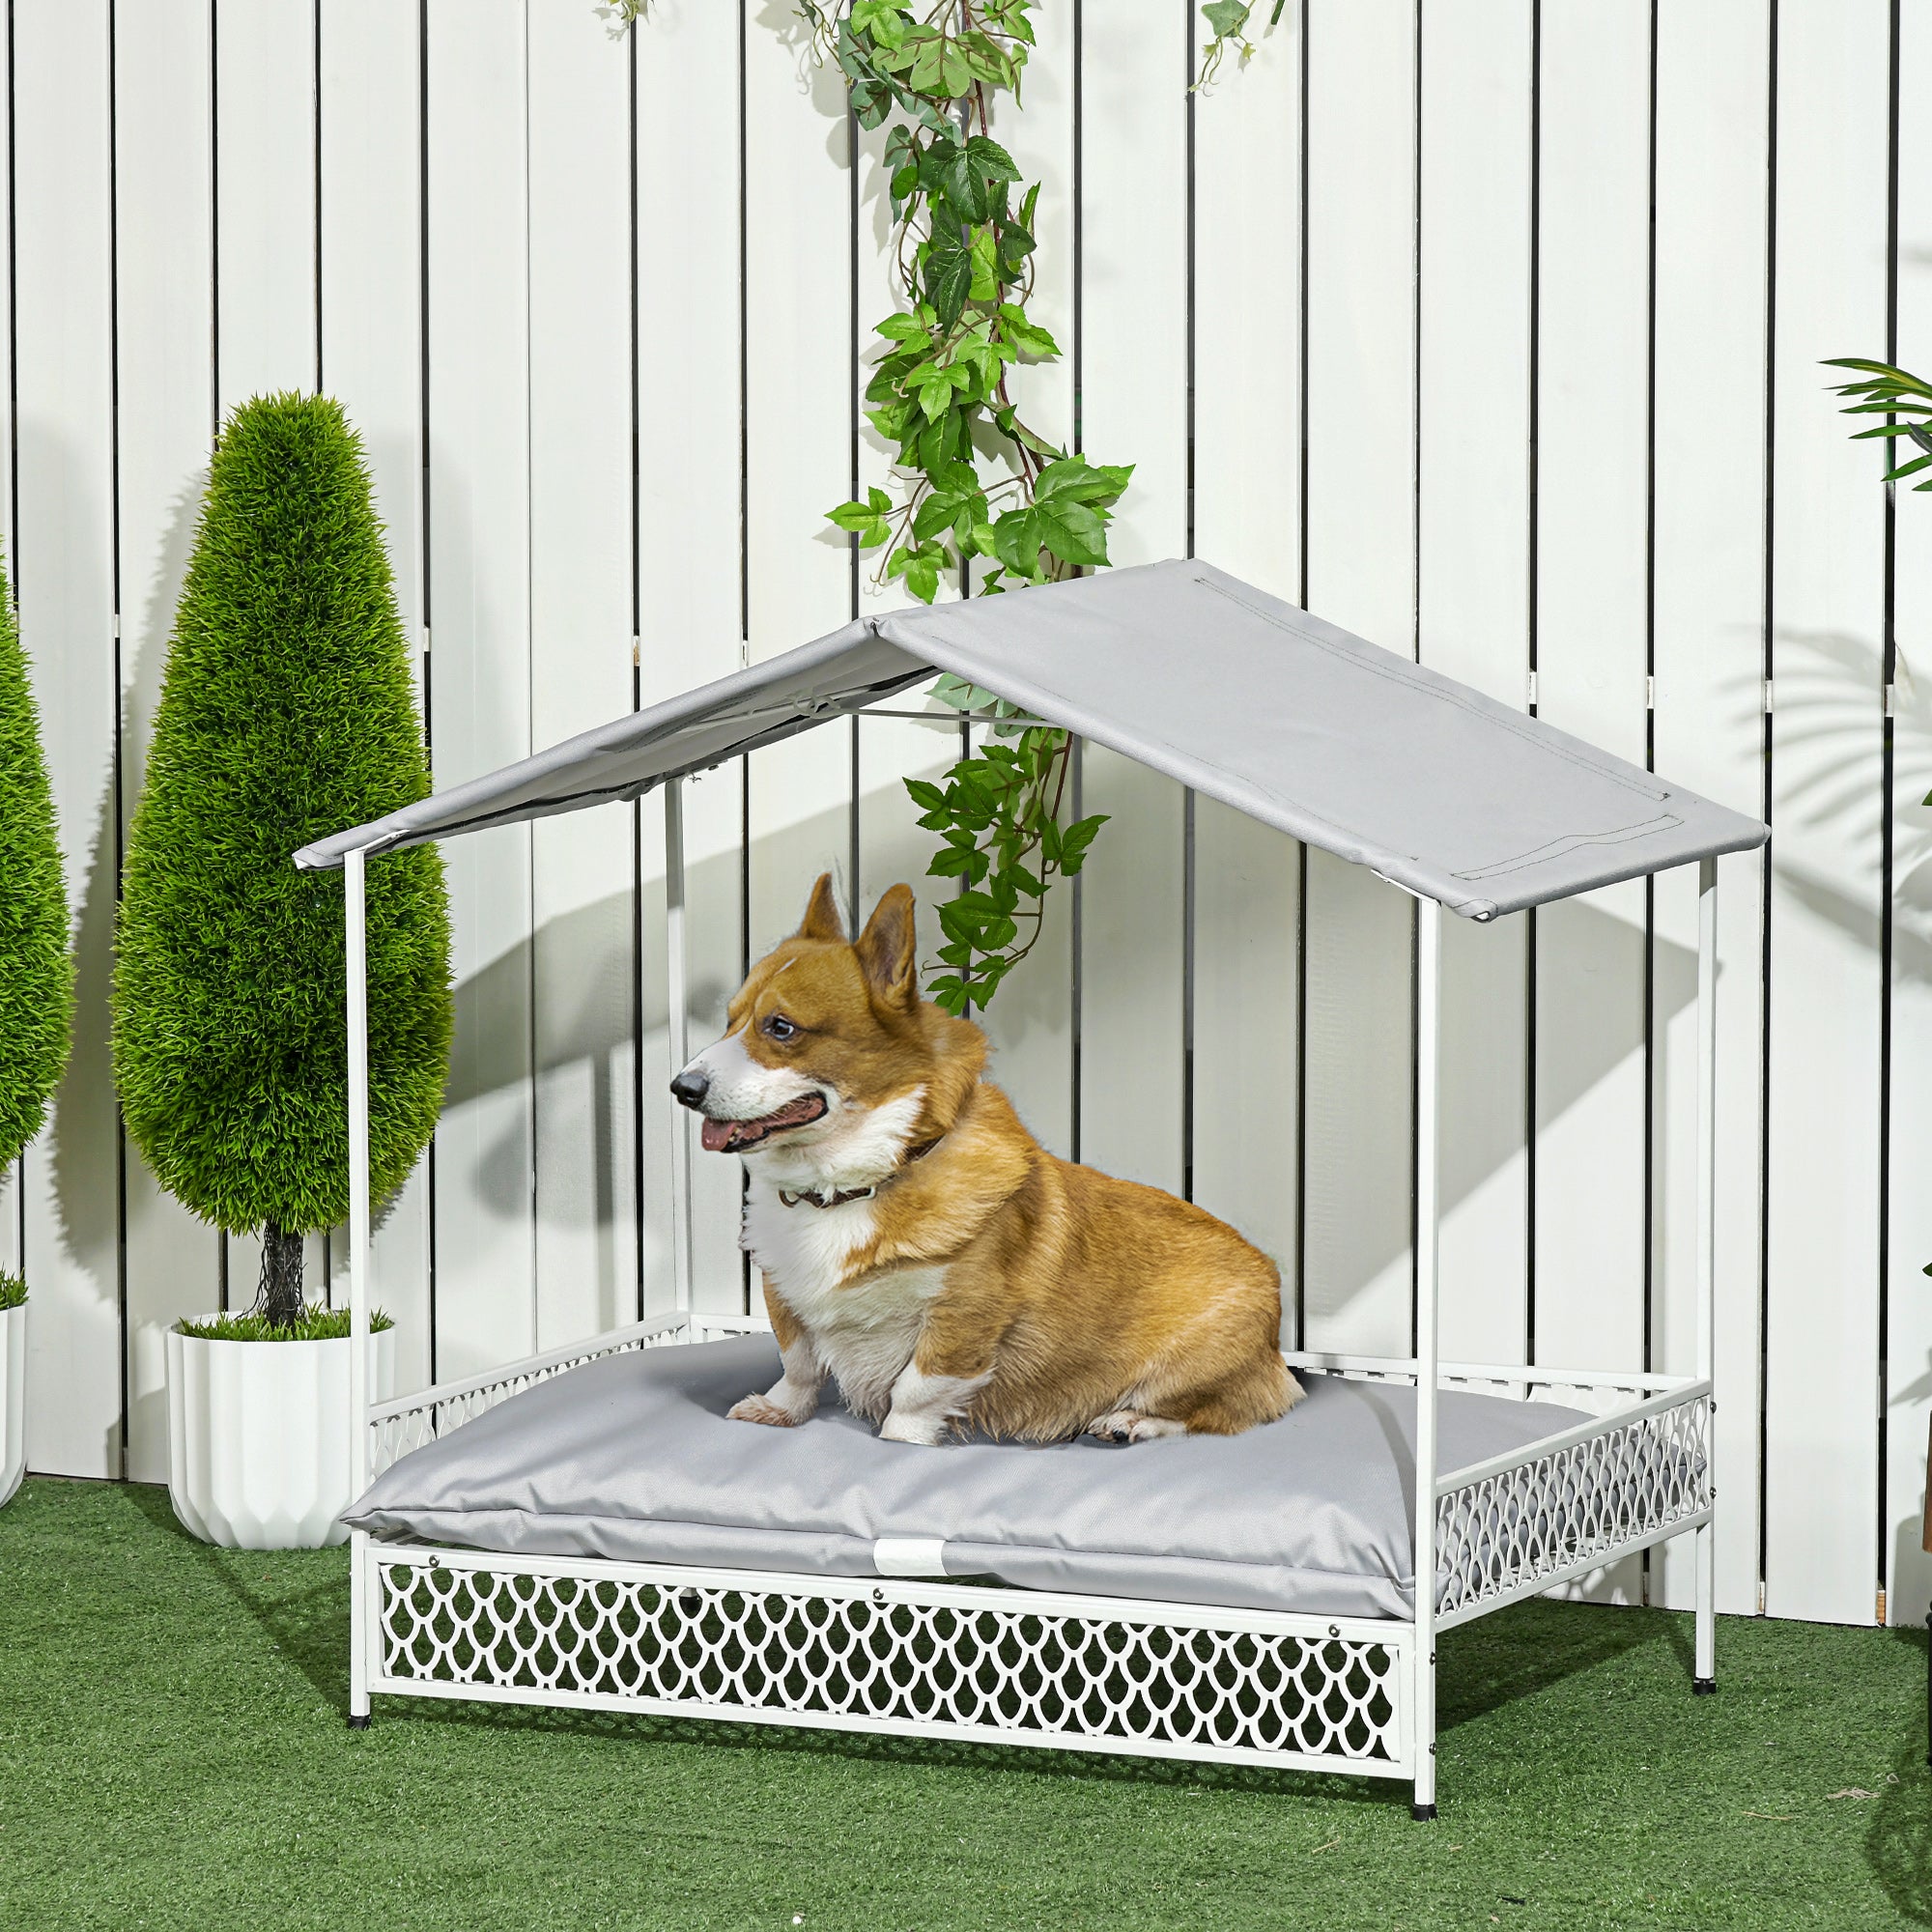 PawHut Dog Bed with Water-Resistant Sun Canopy, Elevated Dog Bed with Soft Cushion, for Indoors, Outdoors, Small, Medium Dogs